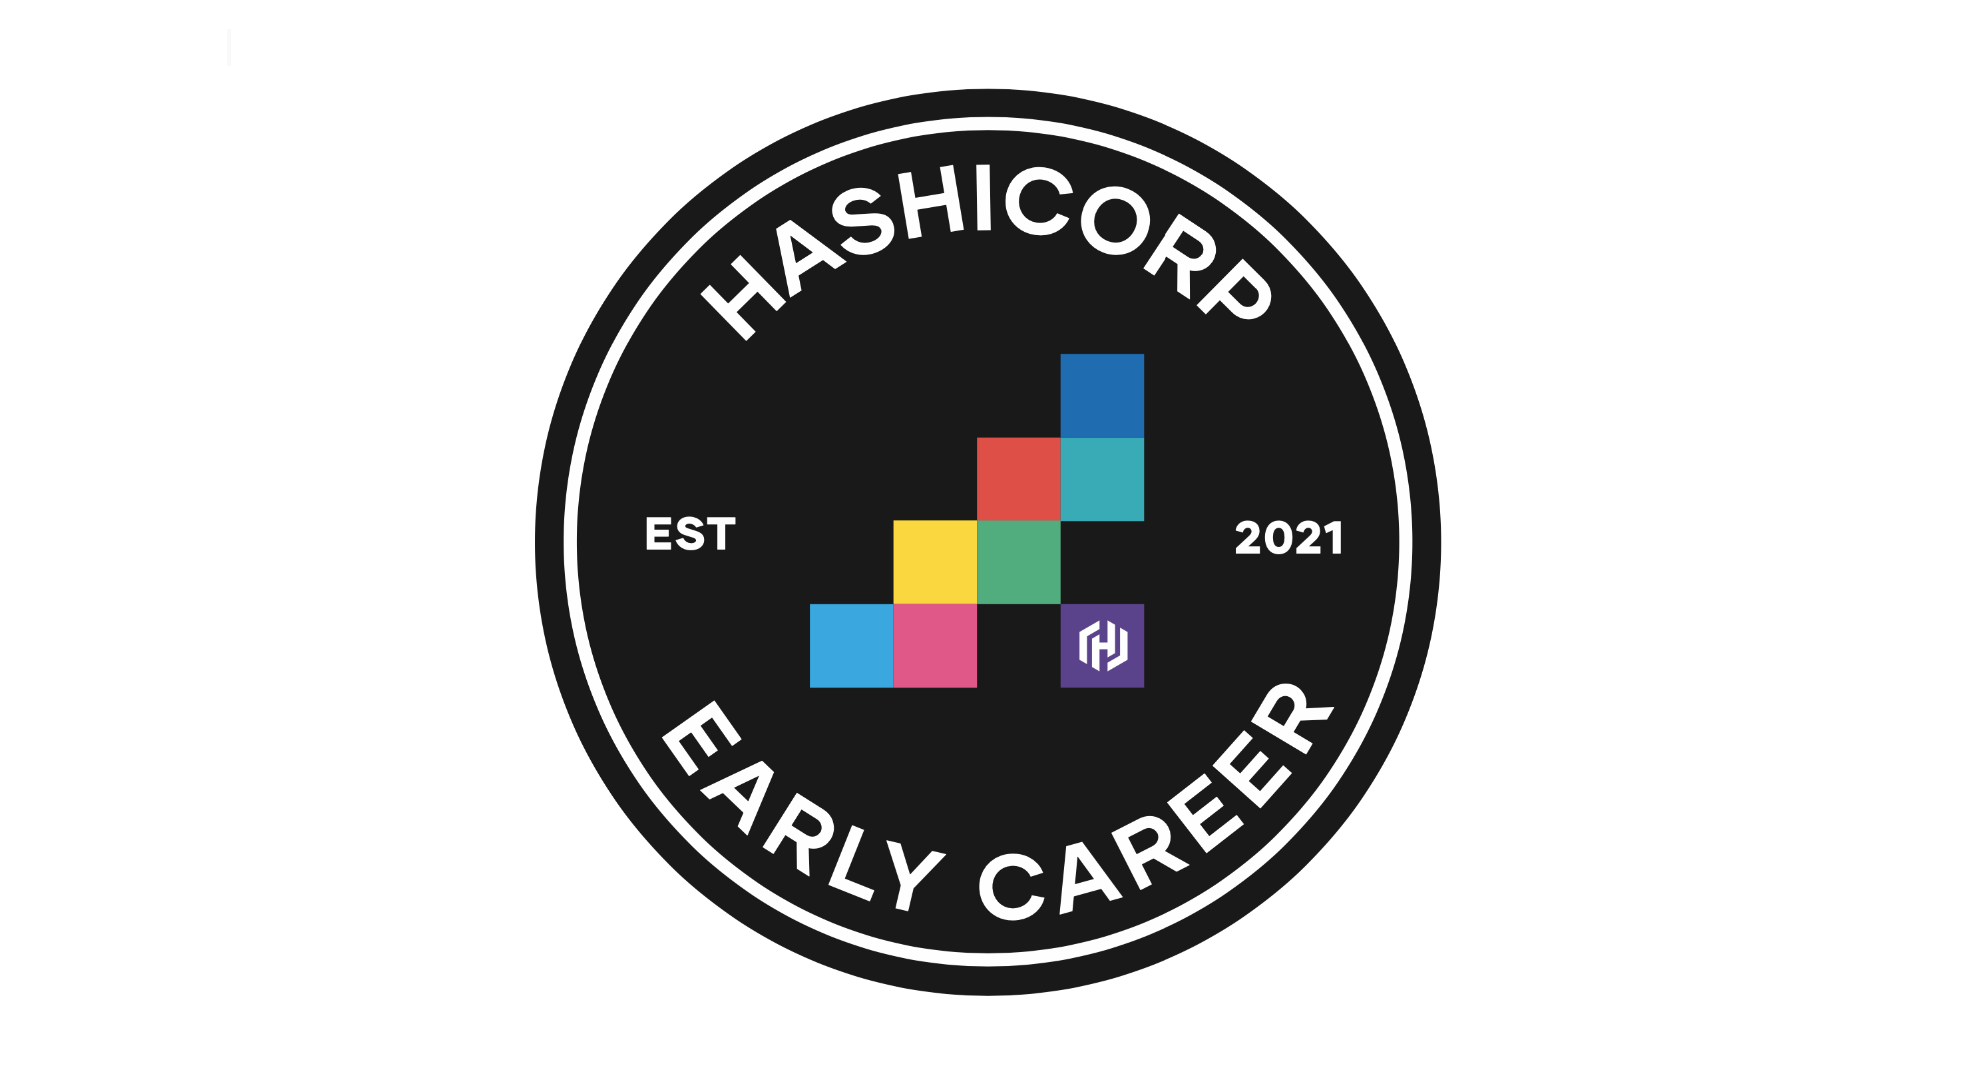 What HashiCorp Interns Learned This Summer